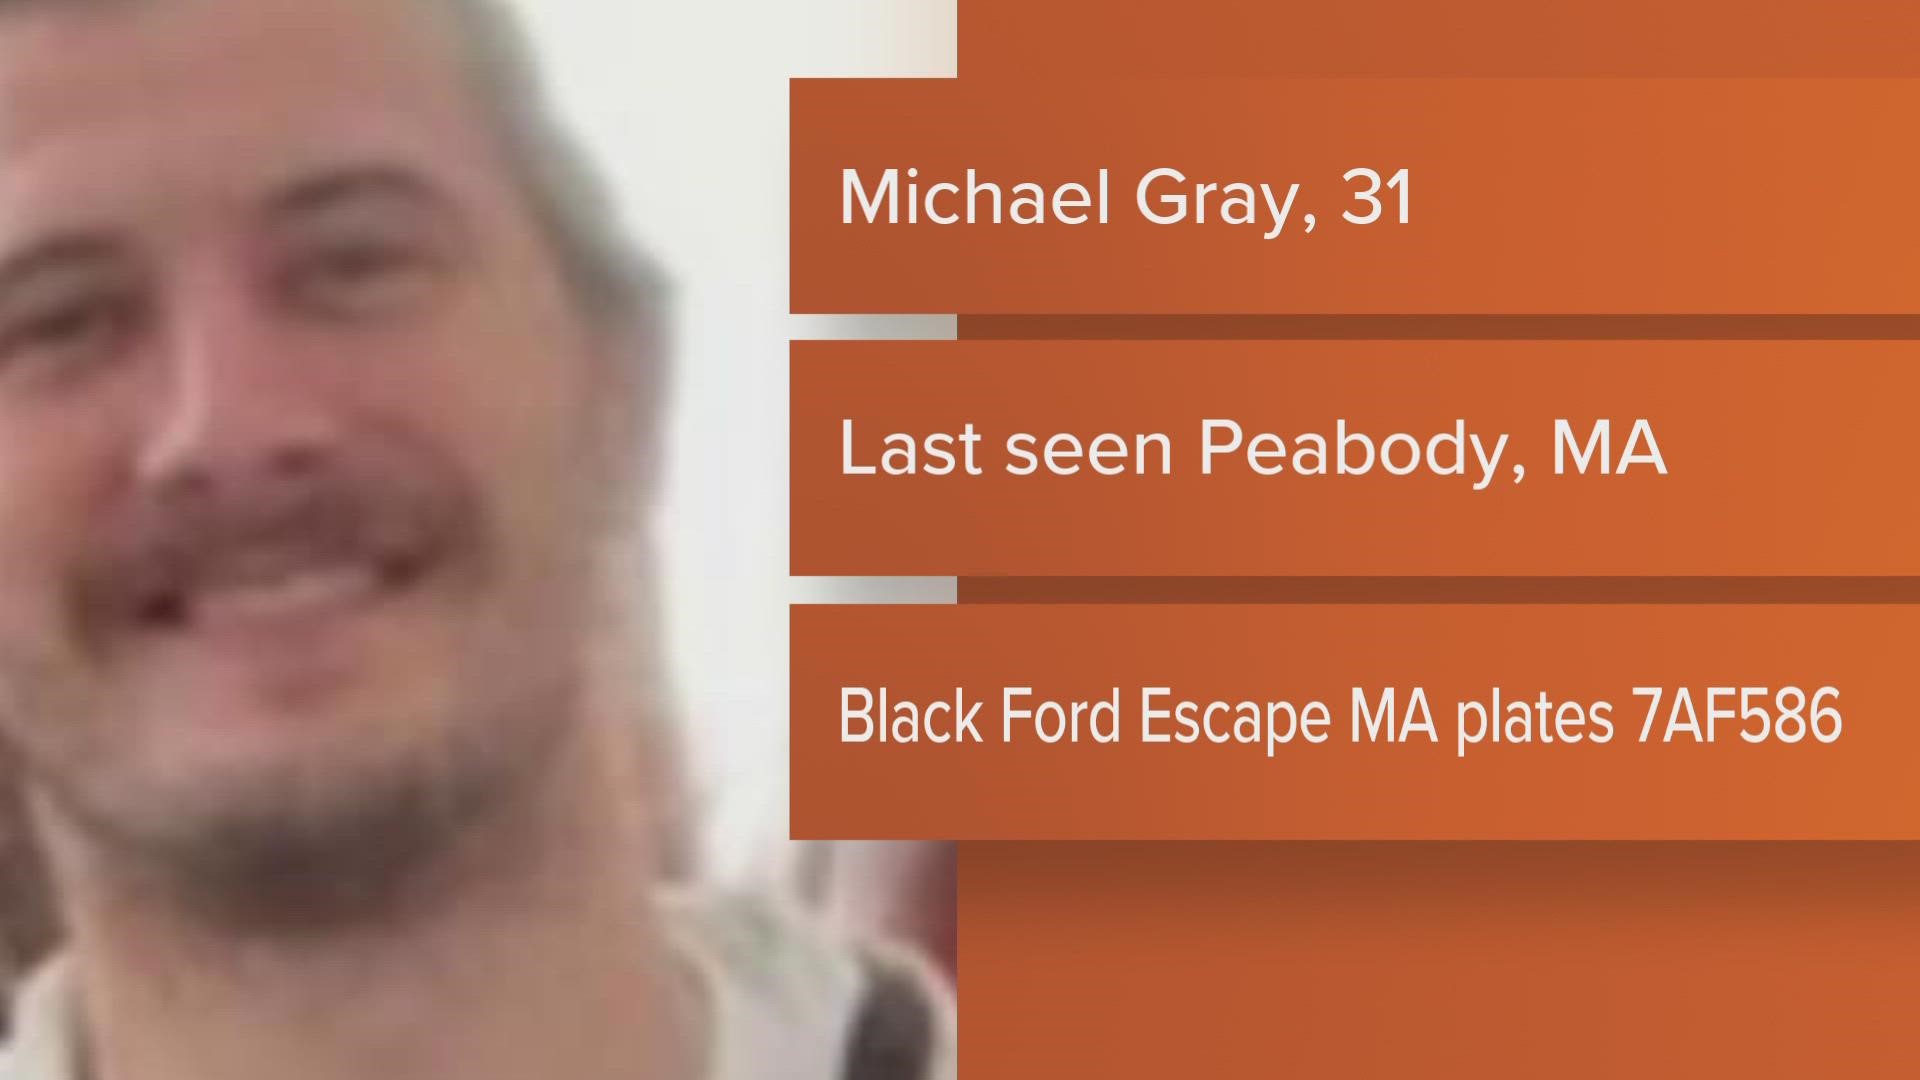 Michael Gray, 31, was last seen after being locked out of his vehicle Sunday night, police said.